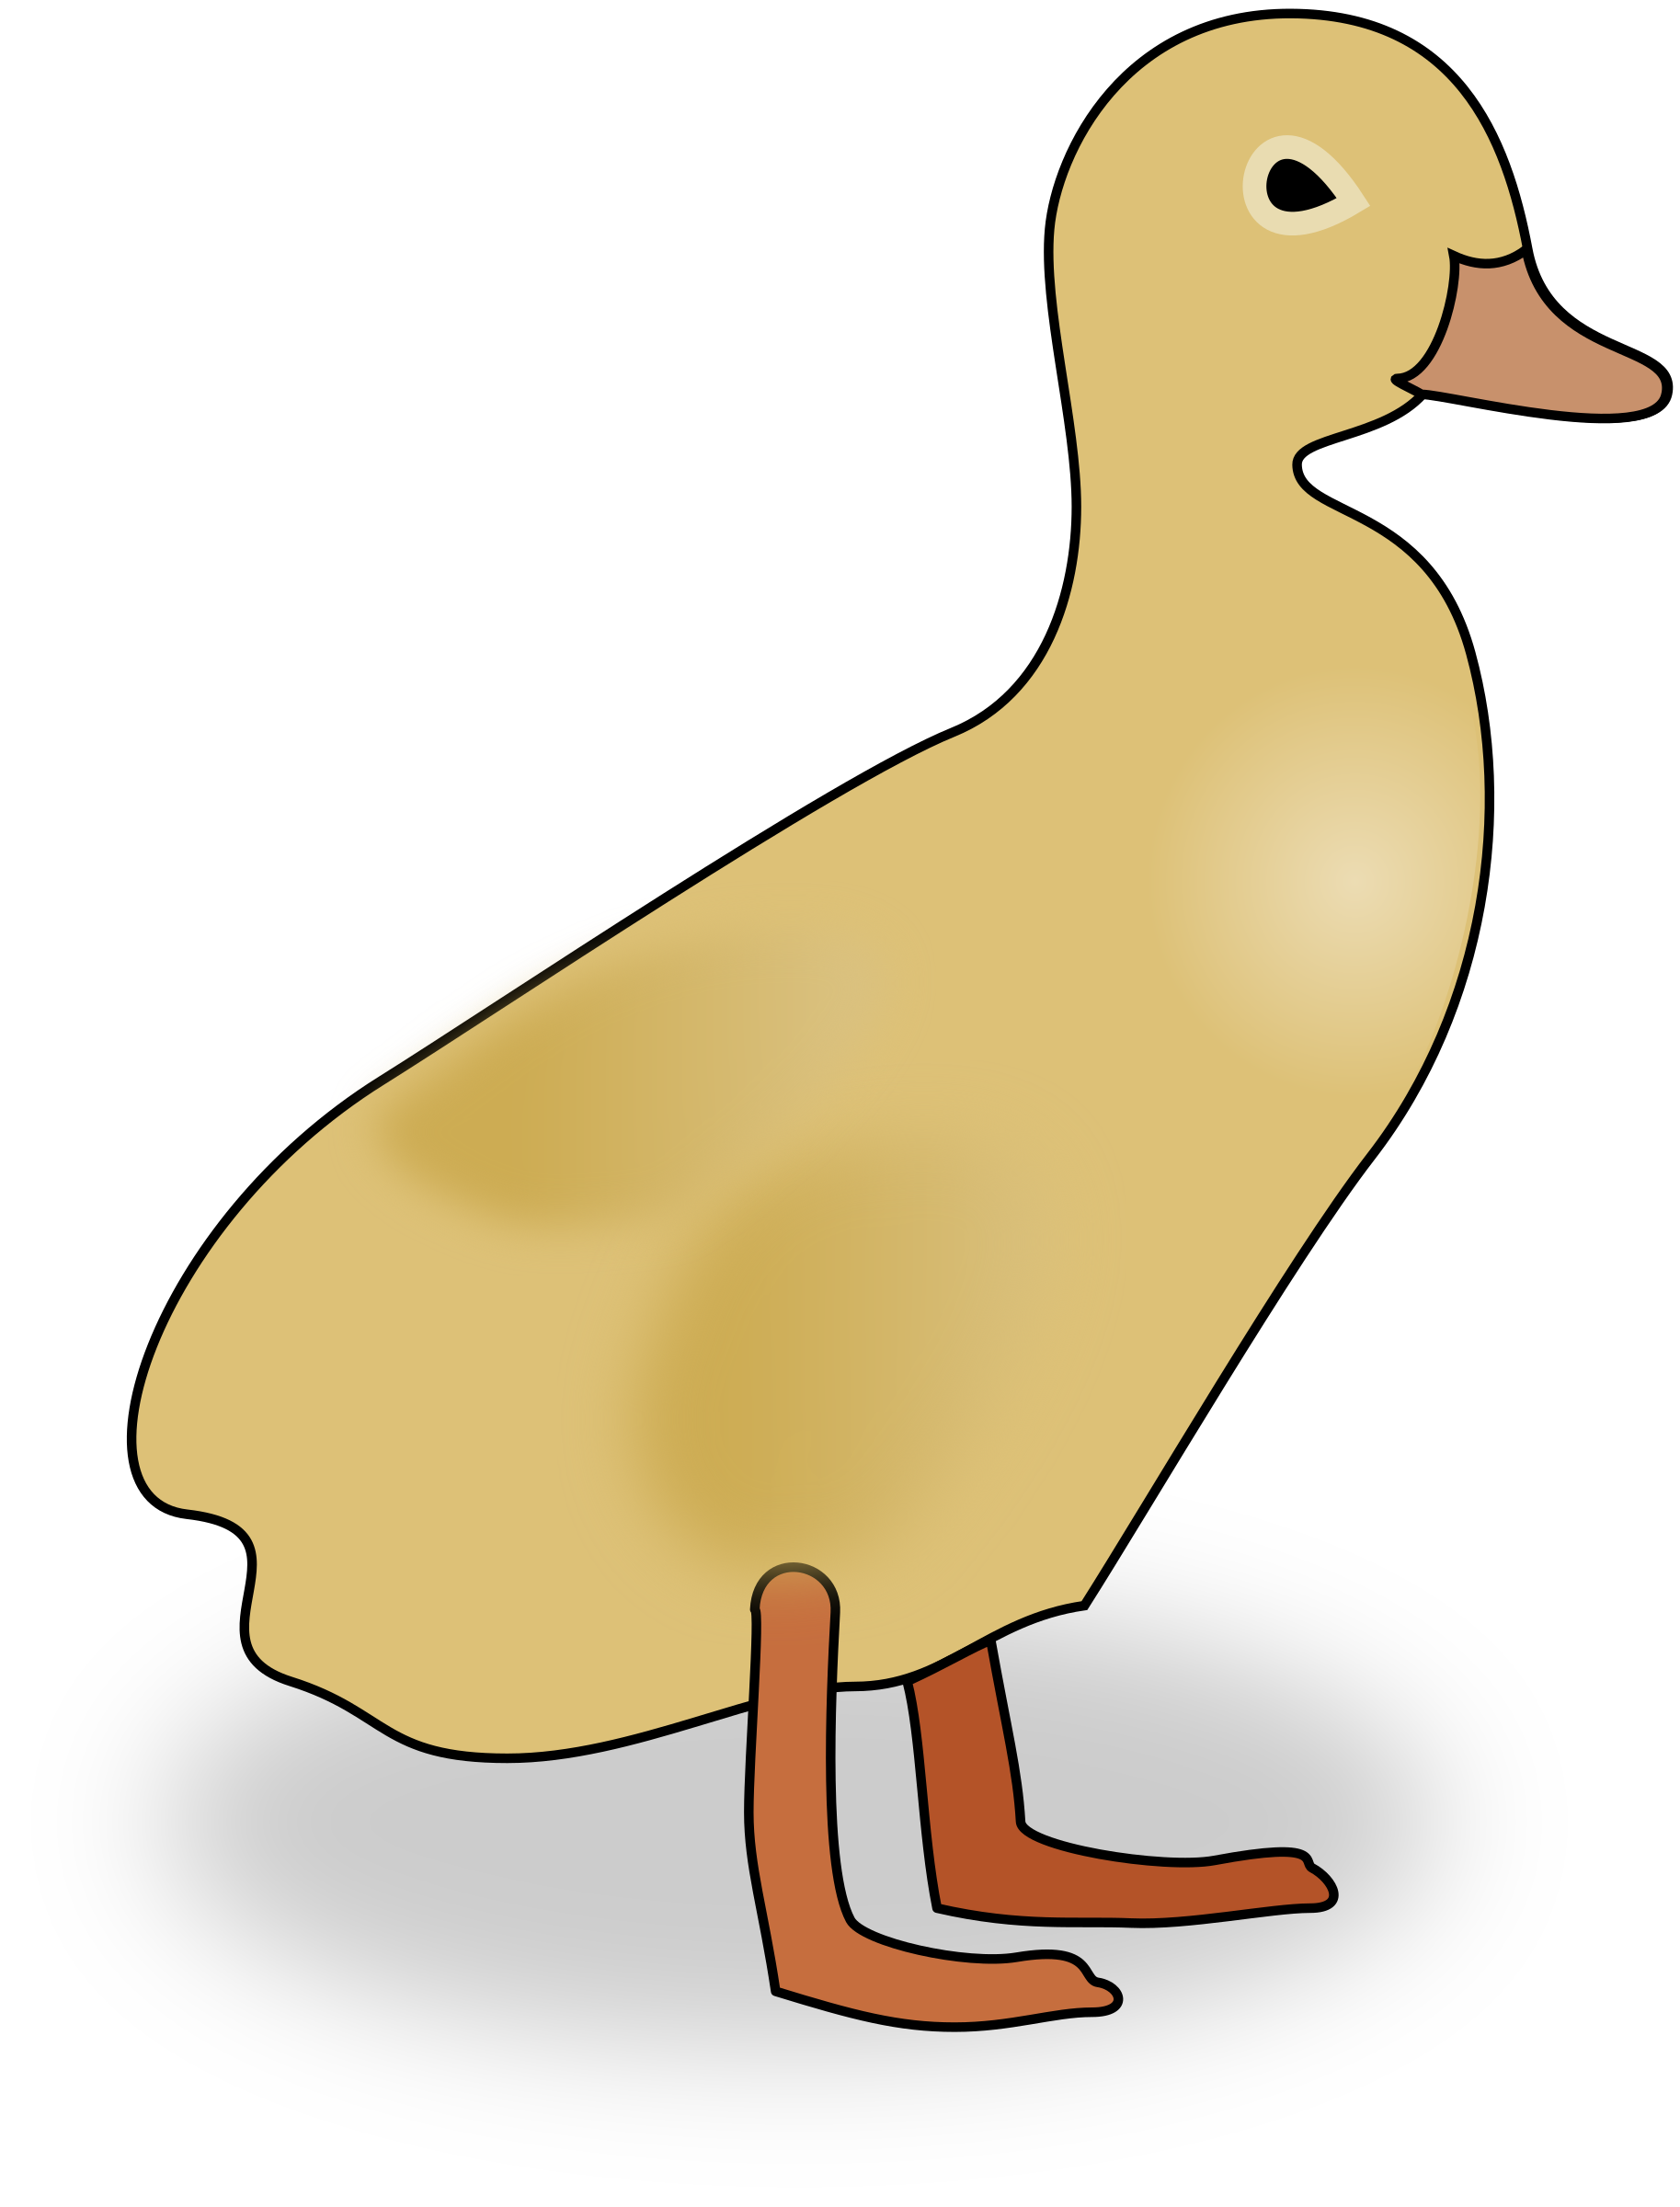 Goose clipart duckling. Ugly at getdrawings com